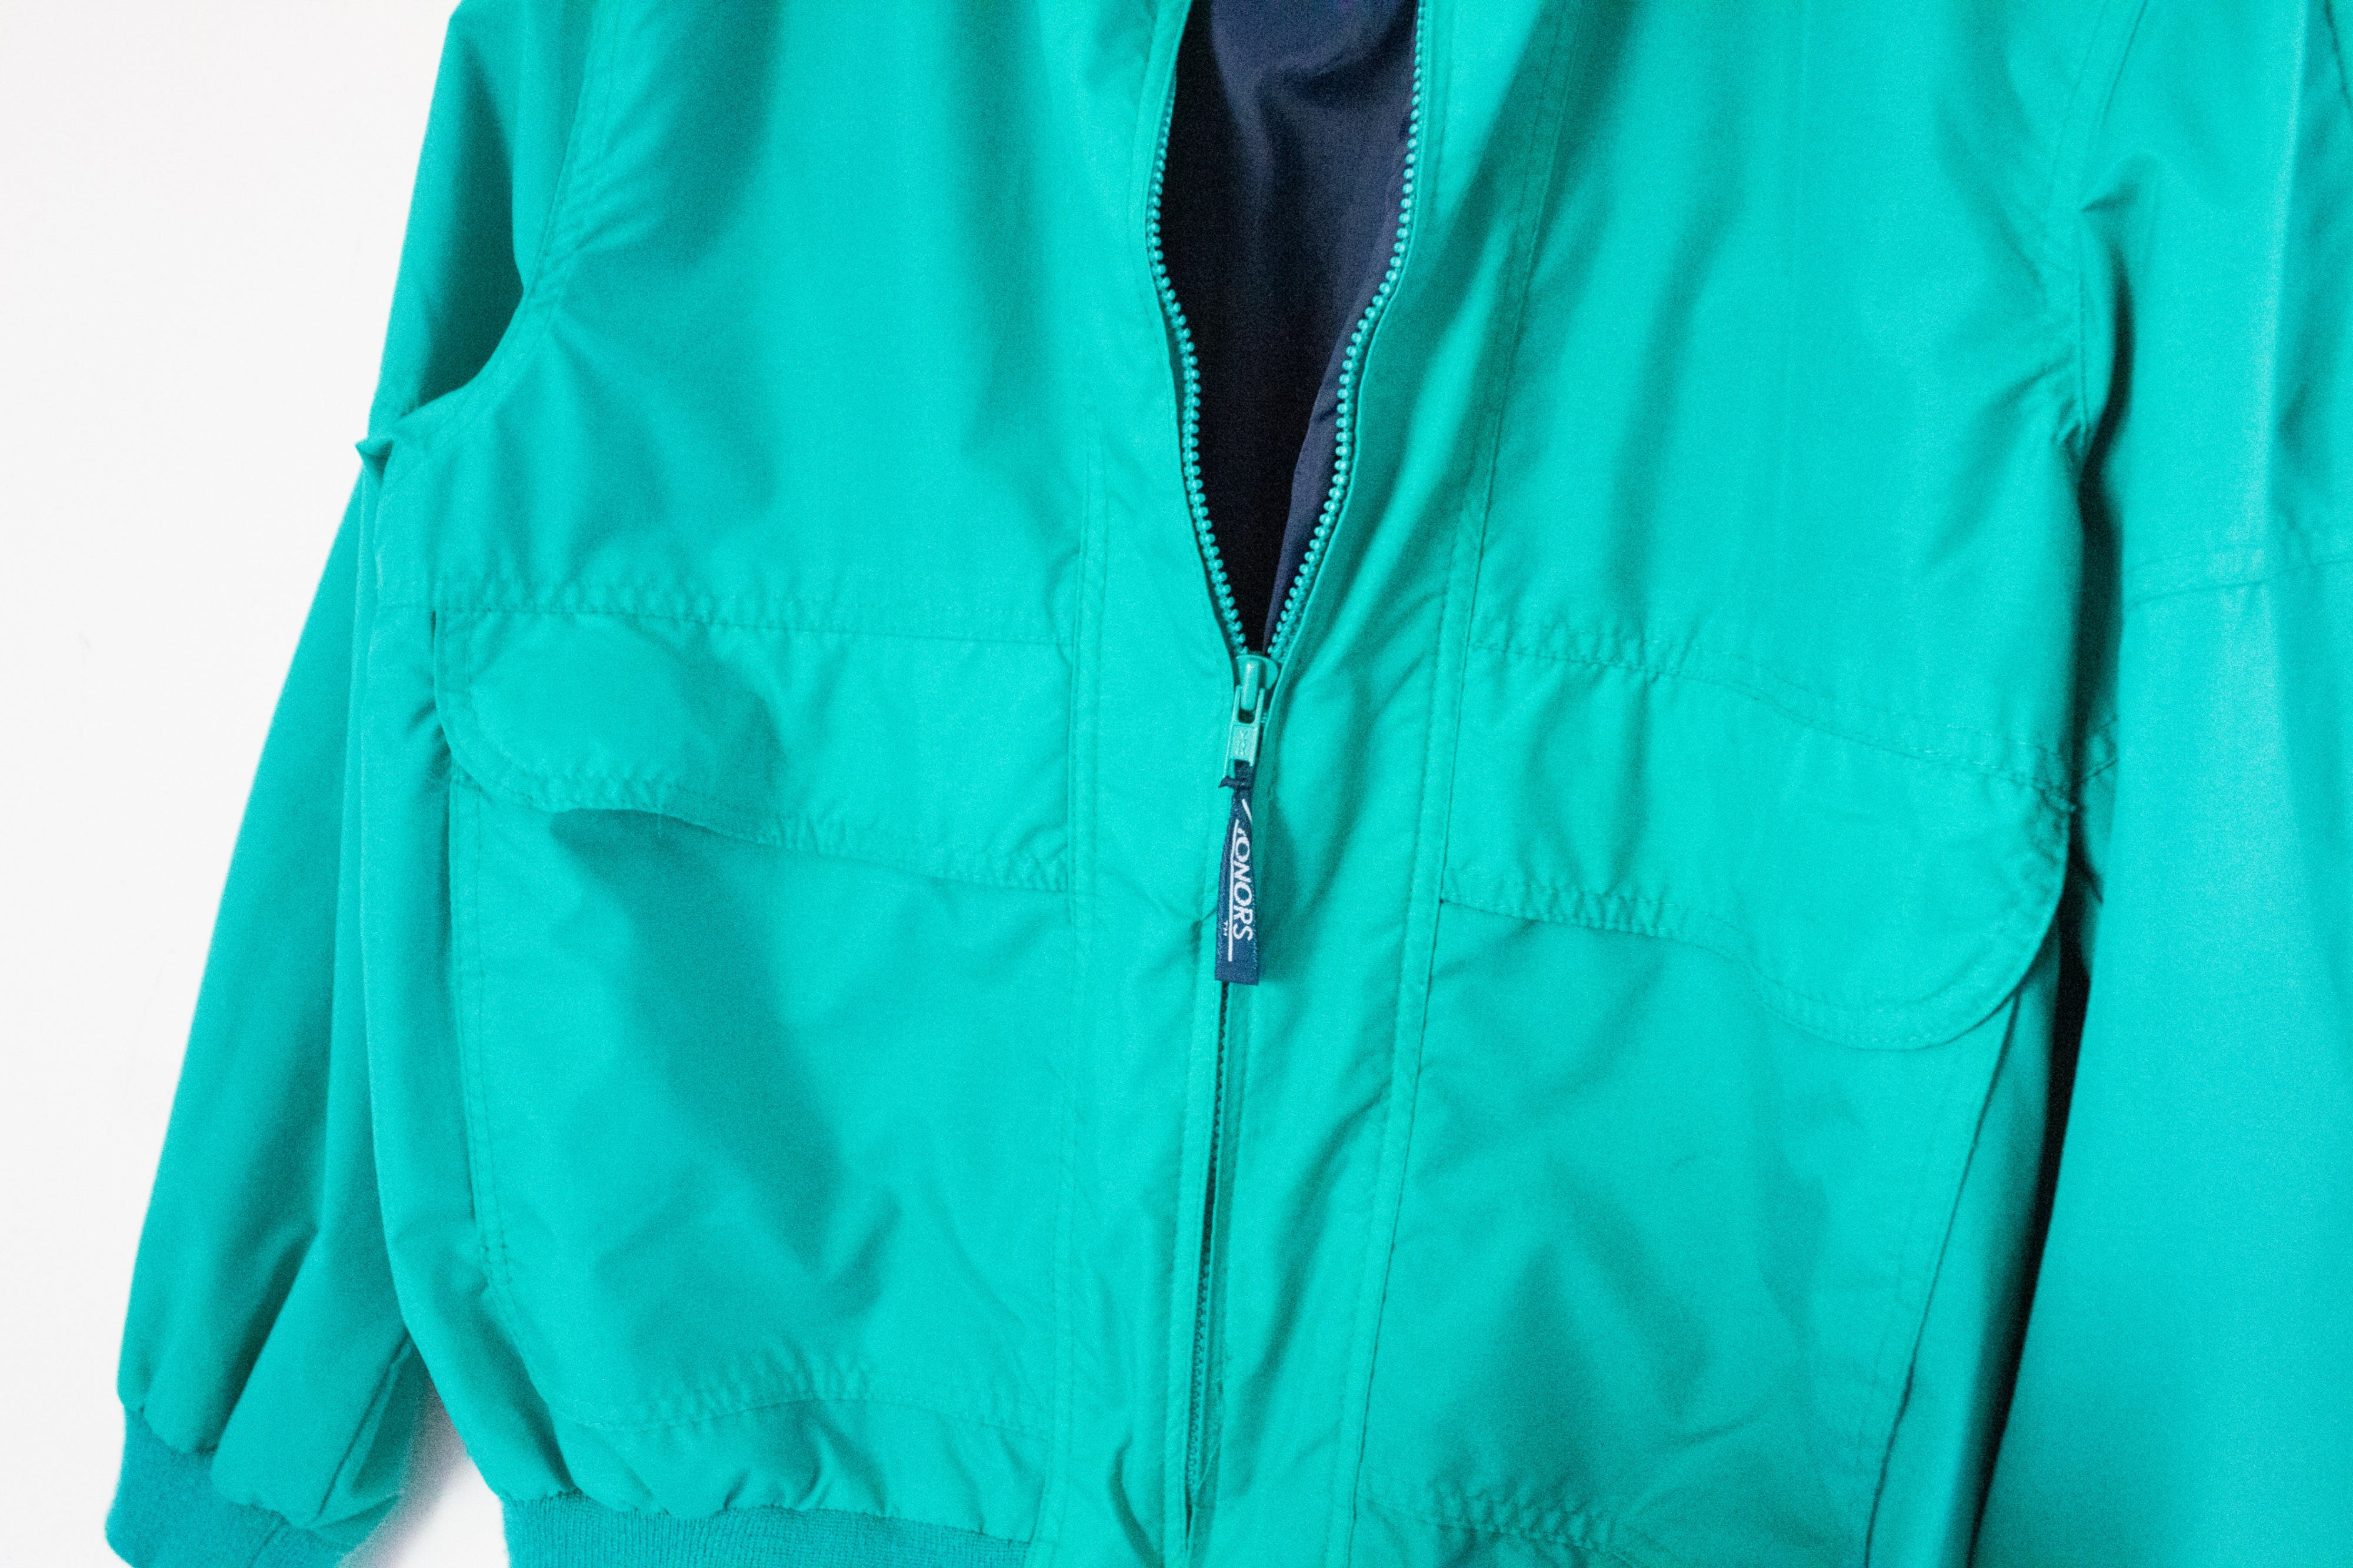 Vintage 90’s Turquoise Windbreaker Jacket by Honors | Shop THRILLING